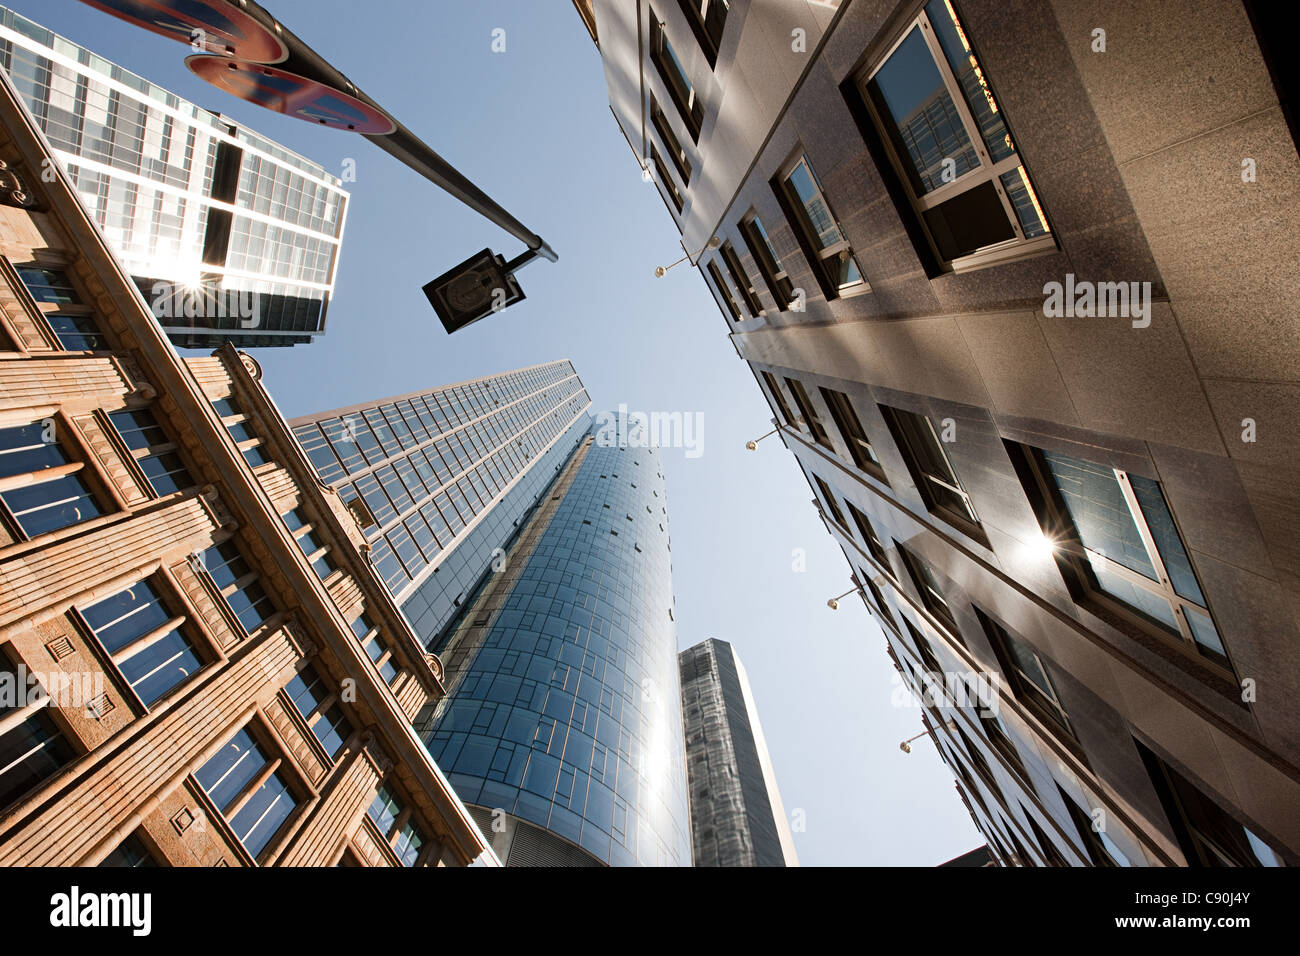 Low angle view of Frankfurt business district, Germany Stock Photo